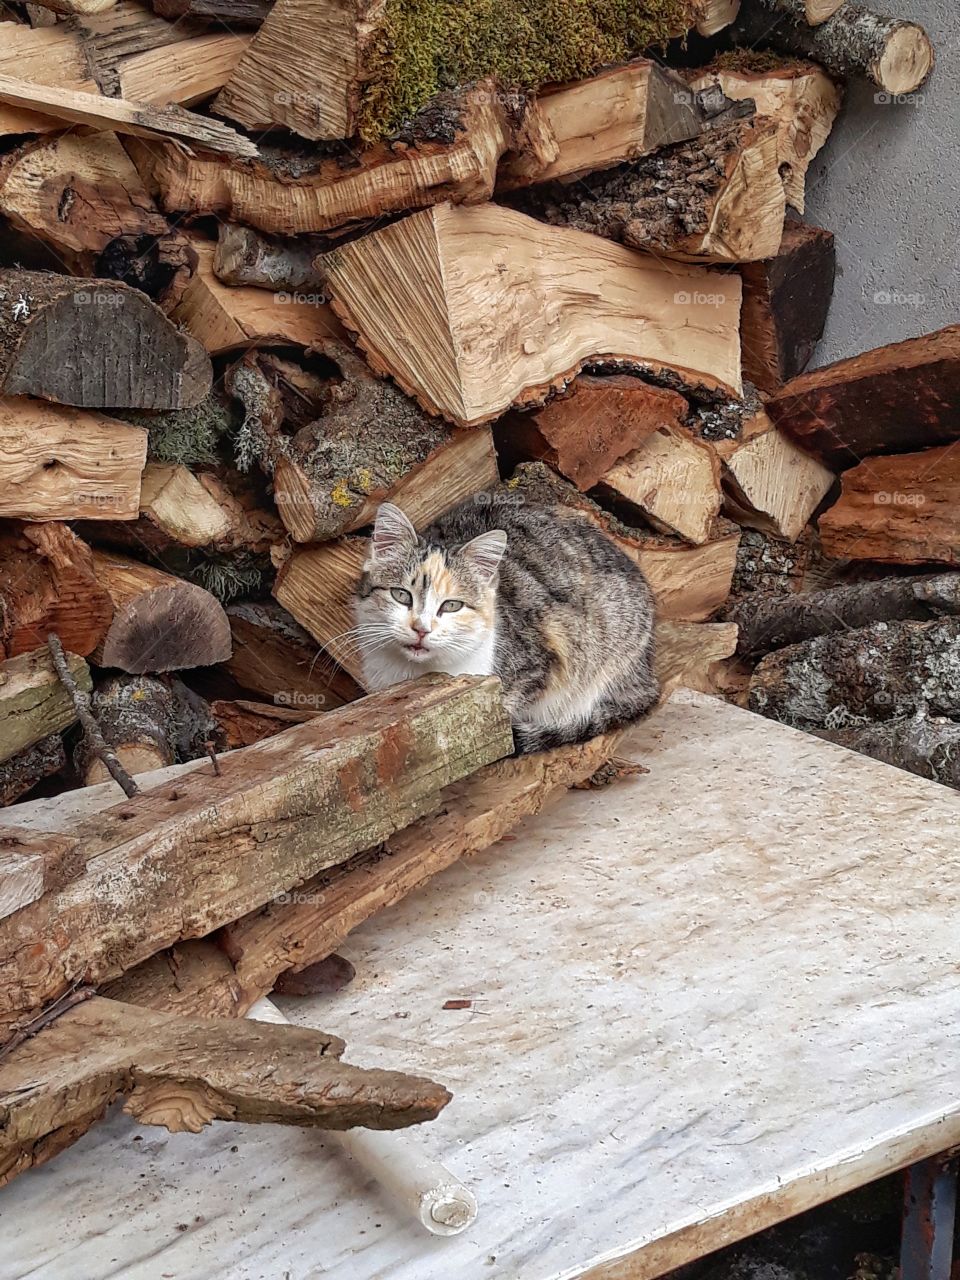 Hiding in the firewood